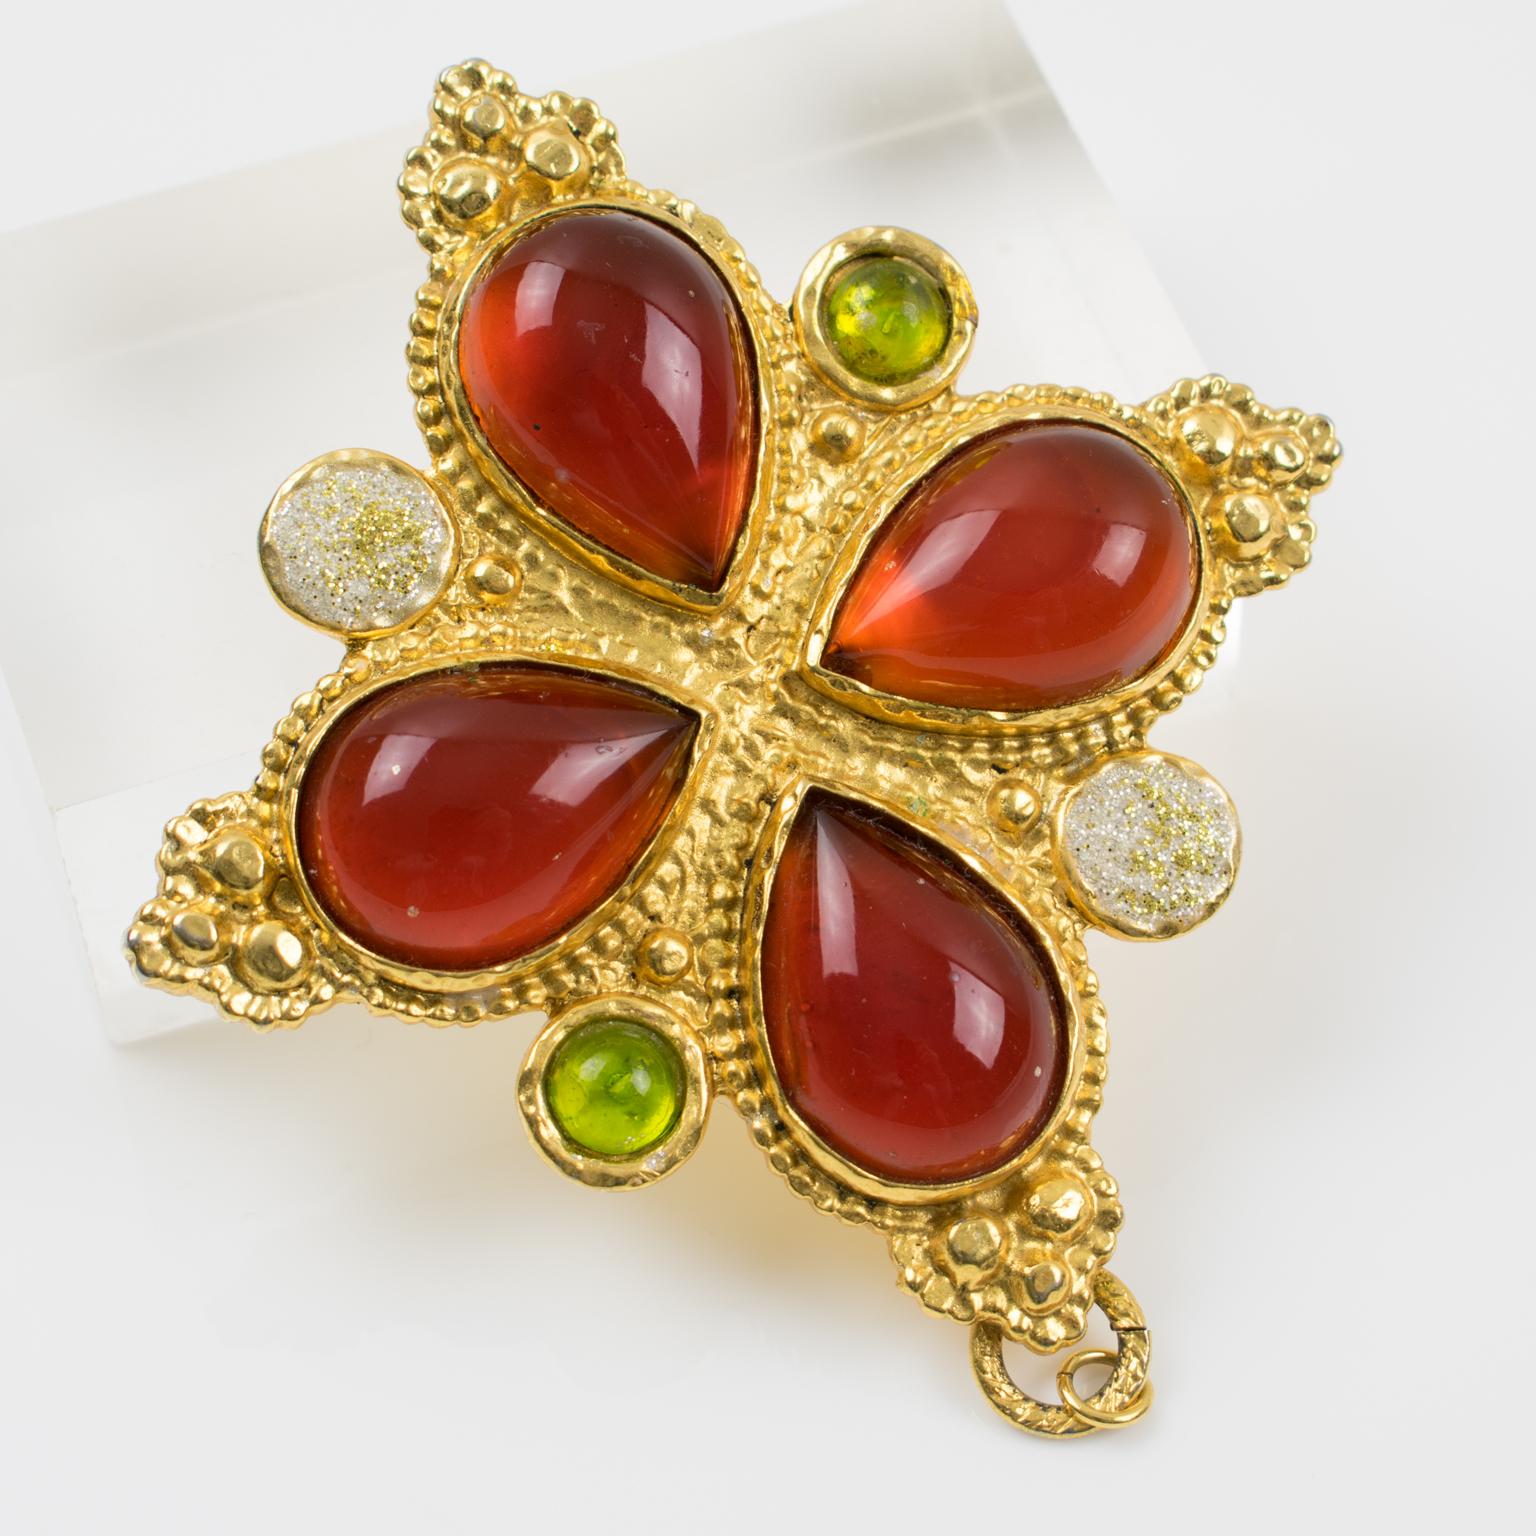 French designer Edouard Rambaud Paris signed pin brooch. Featuring oversized dimensional square cross shape with shiny gilded metal all textured and ornate with 4 poured glass cabochons in red tea amber color. Also compliment with poured glass